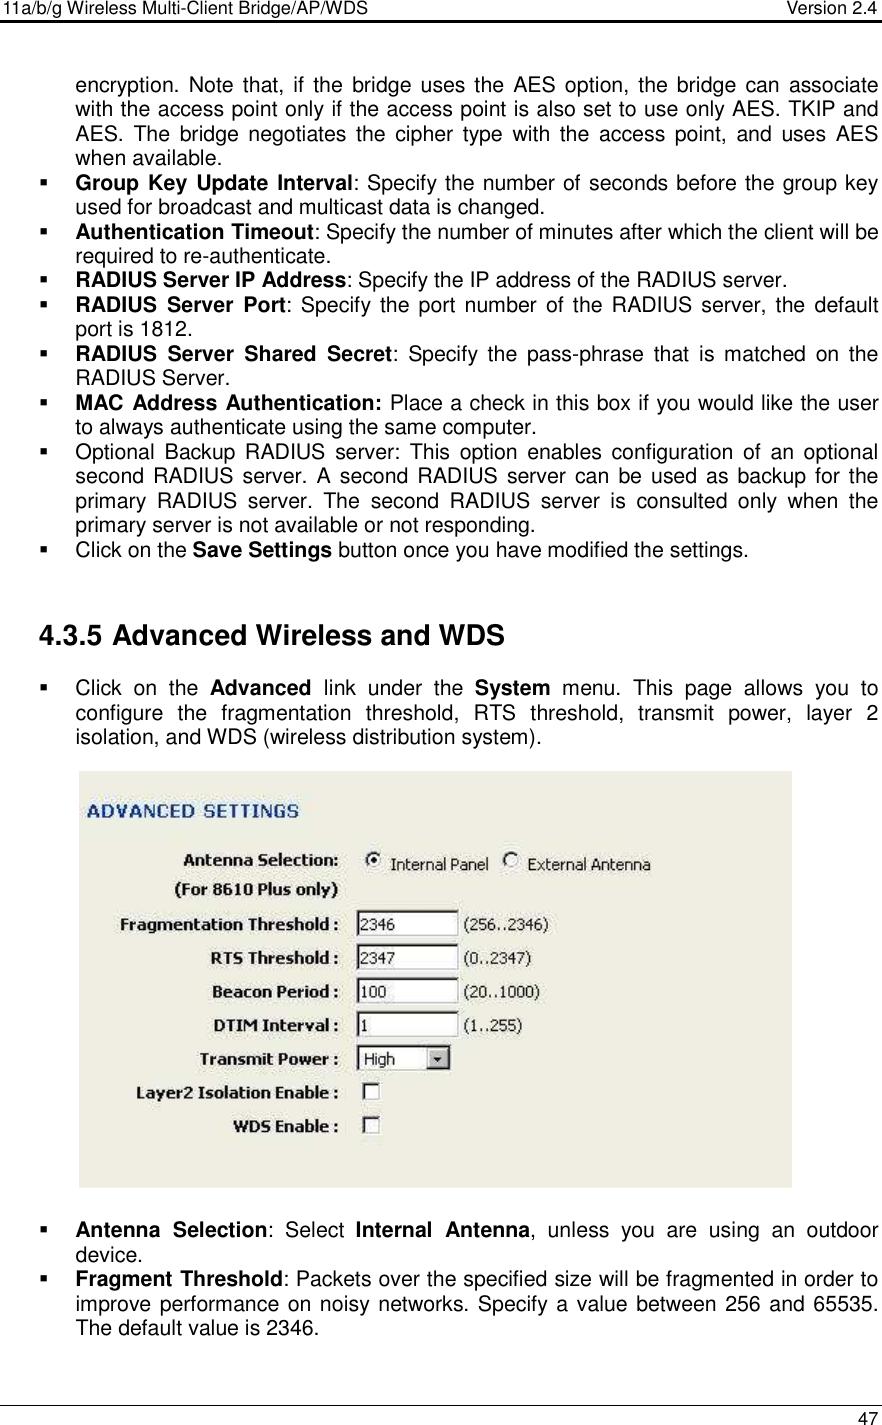 11a/b/g Wireless Multi-Client Bridge/AP/WDS                                  Version 2.4    47  encryption. Note that, if  the  bridge uses the AES option, the bridge  can associate with the access point only if the access point is also set to use only AES. TKIP and AES.  The  bridge negotiates  the  cipher  type  with the  access  point,  and  uses  AES when available.   Group Key Update Interval: Specify the number of seconds before the group key used for broadcast and multicast data is changed.   Authentication Timeout: Specify the number of minutes after which the client will be required to re-authenticate.   RADIUS Server IP Address: Specify the IP address of the RADIUS server.    RADIUS  Server  Port: Specify the port  number of the RADIUS server, the default port is 1812.  RADIUS  Server  Shared  Secret:  Specify  the  pass-phrase  that  is  matched  on  the RADIUS Server.   MAC Address Authentication: Place a check in this box if you would like the user to always authenticate using the same computer.    Optional  Backup RADIUS  server:  This  option  enables  configuration  of  an  optional second RADIUS server. A second RADIUS server  can  be used as backup for the primary  RADIUS  server.  The  second  RADIUS  server  is  consulted  only  when  the primary server is not available or not responding.    Click on the Save Settings button once you have modified the settings.  4.3.5 Advanced Wireless and WDS   Click  on  the  Advanced  link  under  the  System  menu.  This  page  allows  you  to configure  the  fragmentation  threshold,  RTS  threshold,  transmit  power,  layer  2 isolation, and WDS (wireless distribution system).                    Antenna  Selection:  Select  Internal  Antenna,  unless  you  are  using  an  outdoor device.    Fragment Threshold: Packets over the specified size will be fragmented in order to improve performance on noisy networks. Specify a value between 256 and 65535. The default value is 2346.    